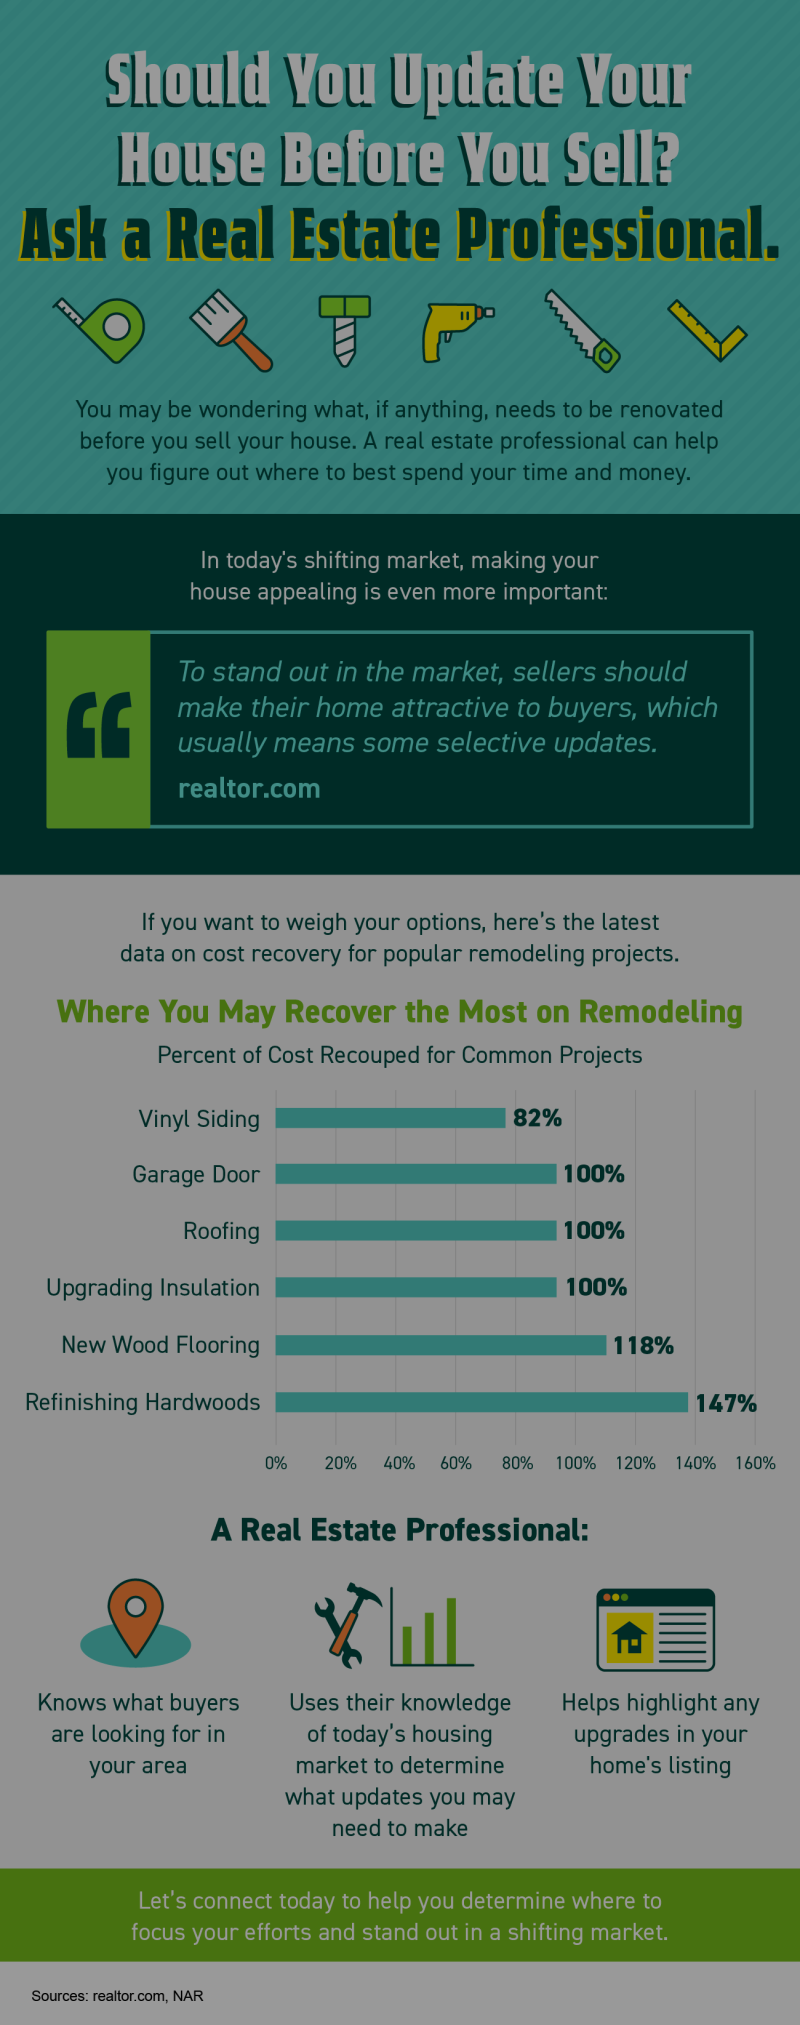 Should You Update Your House Before You Sell? Ask a Real Estate Professional.